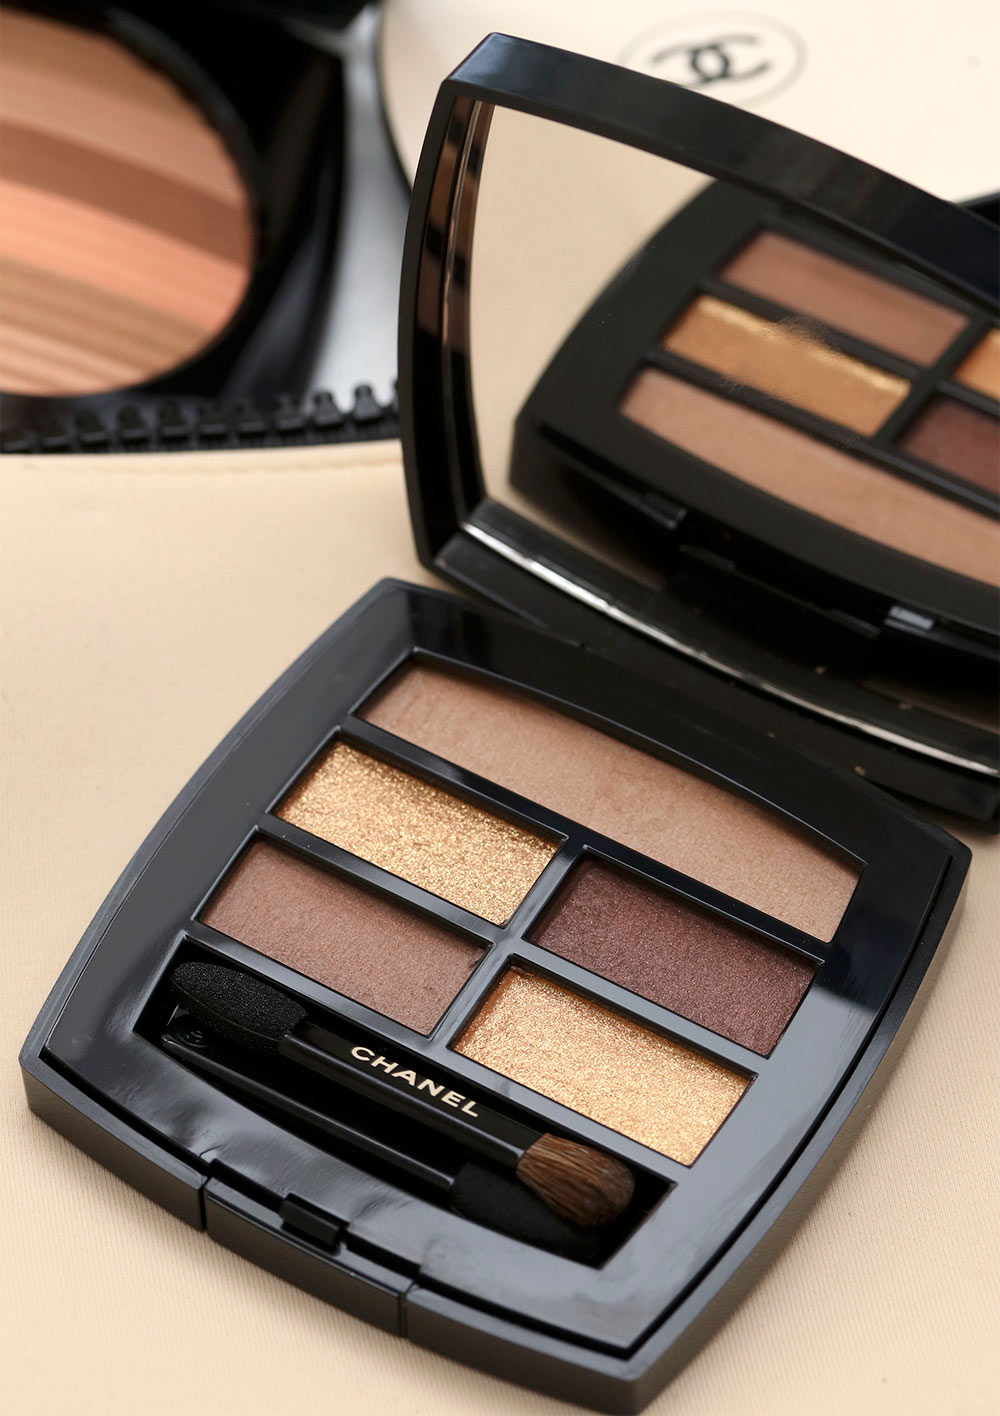 Chanel Les Beiges Healthy Glow Natural Eyeshadow Palette in Deep